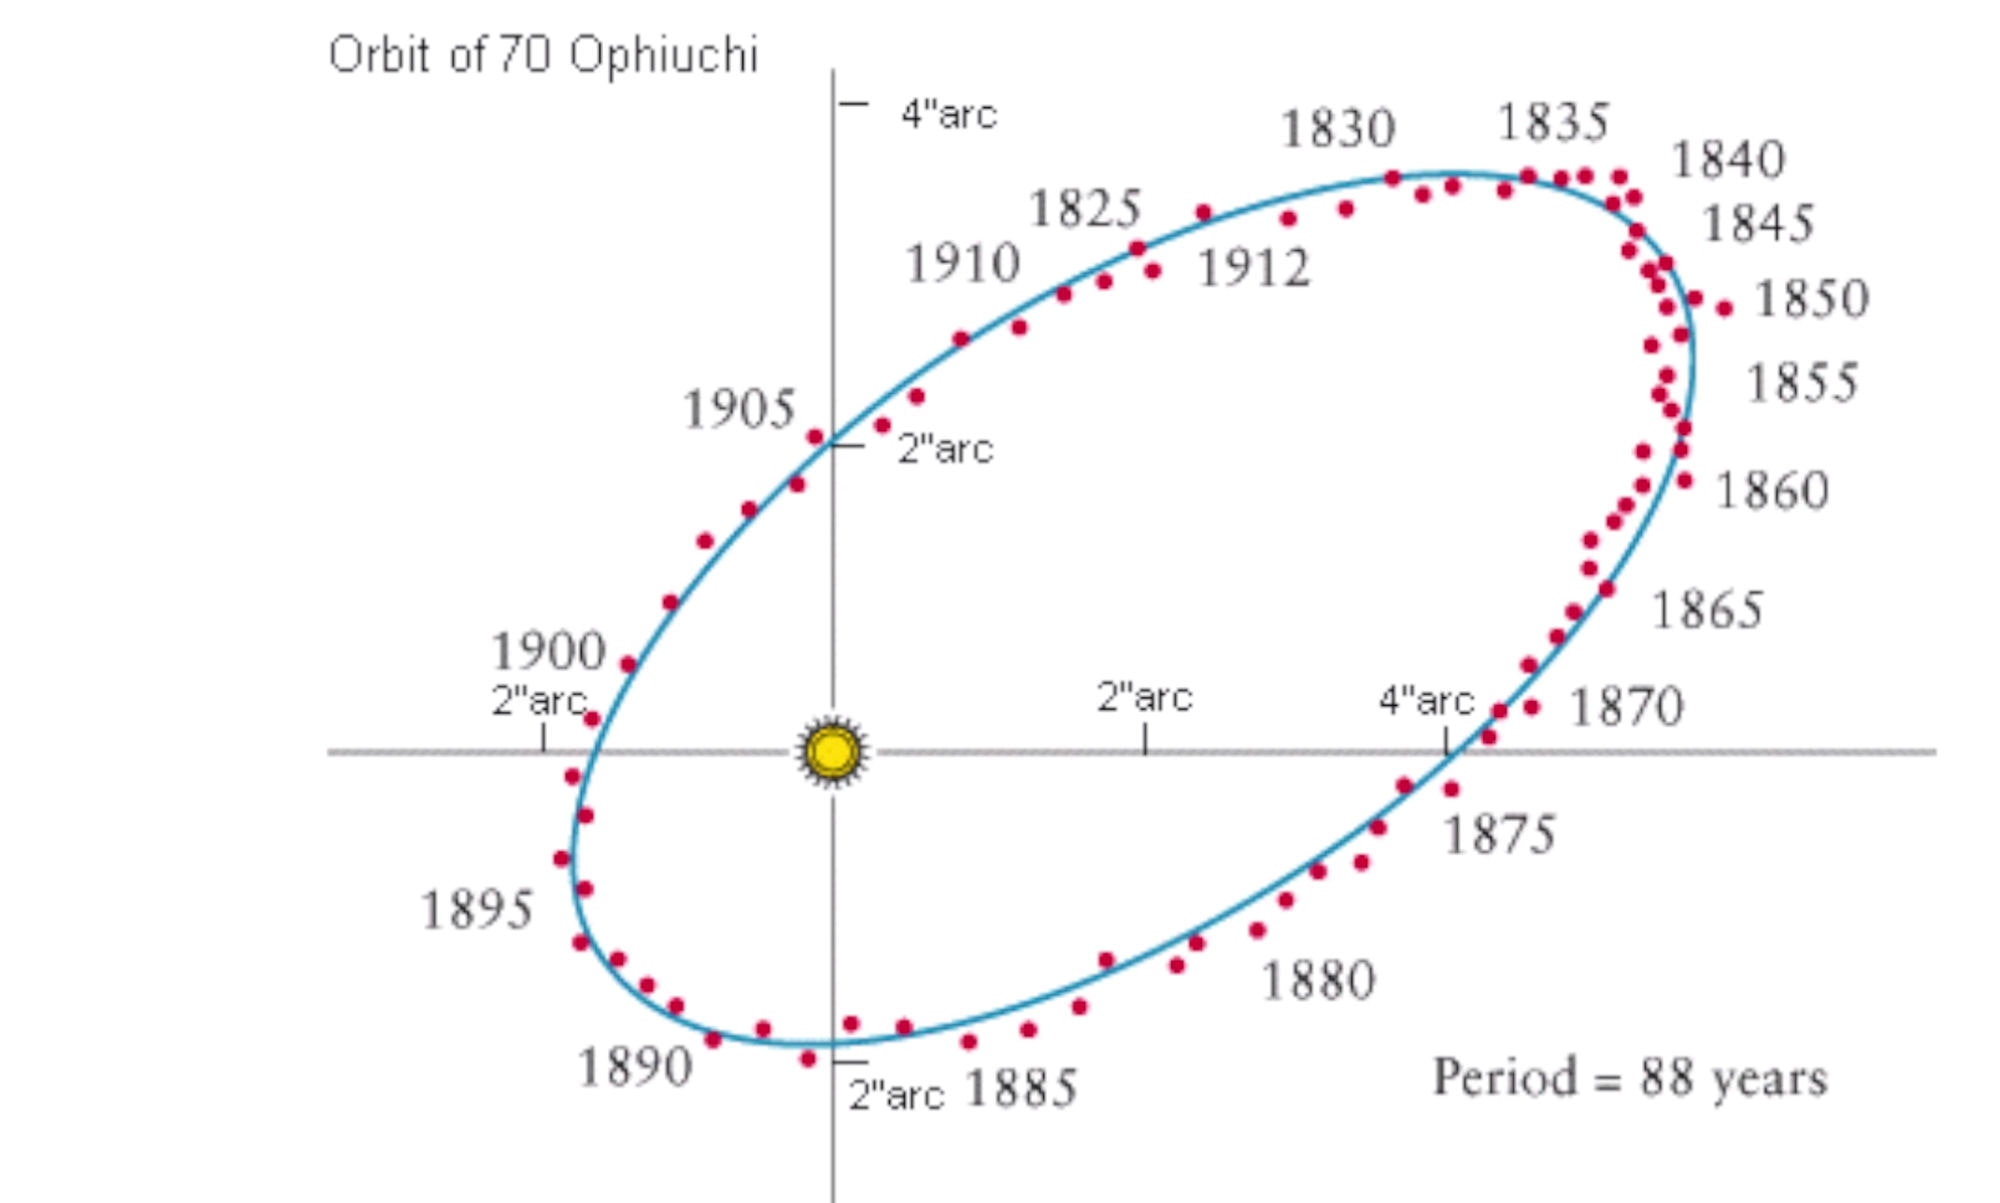 Are the wiggles in the orbit of 70 Oph B due to a planet orbiting it? In 1855, an astronomer sure thought so. Credit: David Kipping, from the video